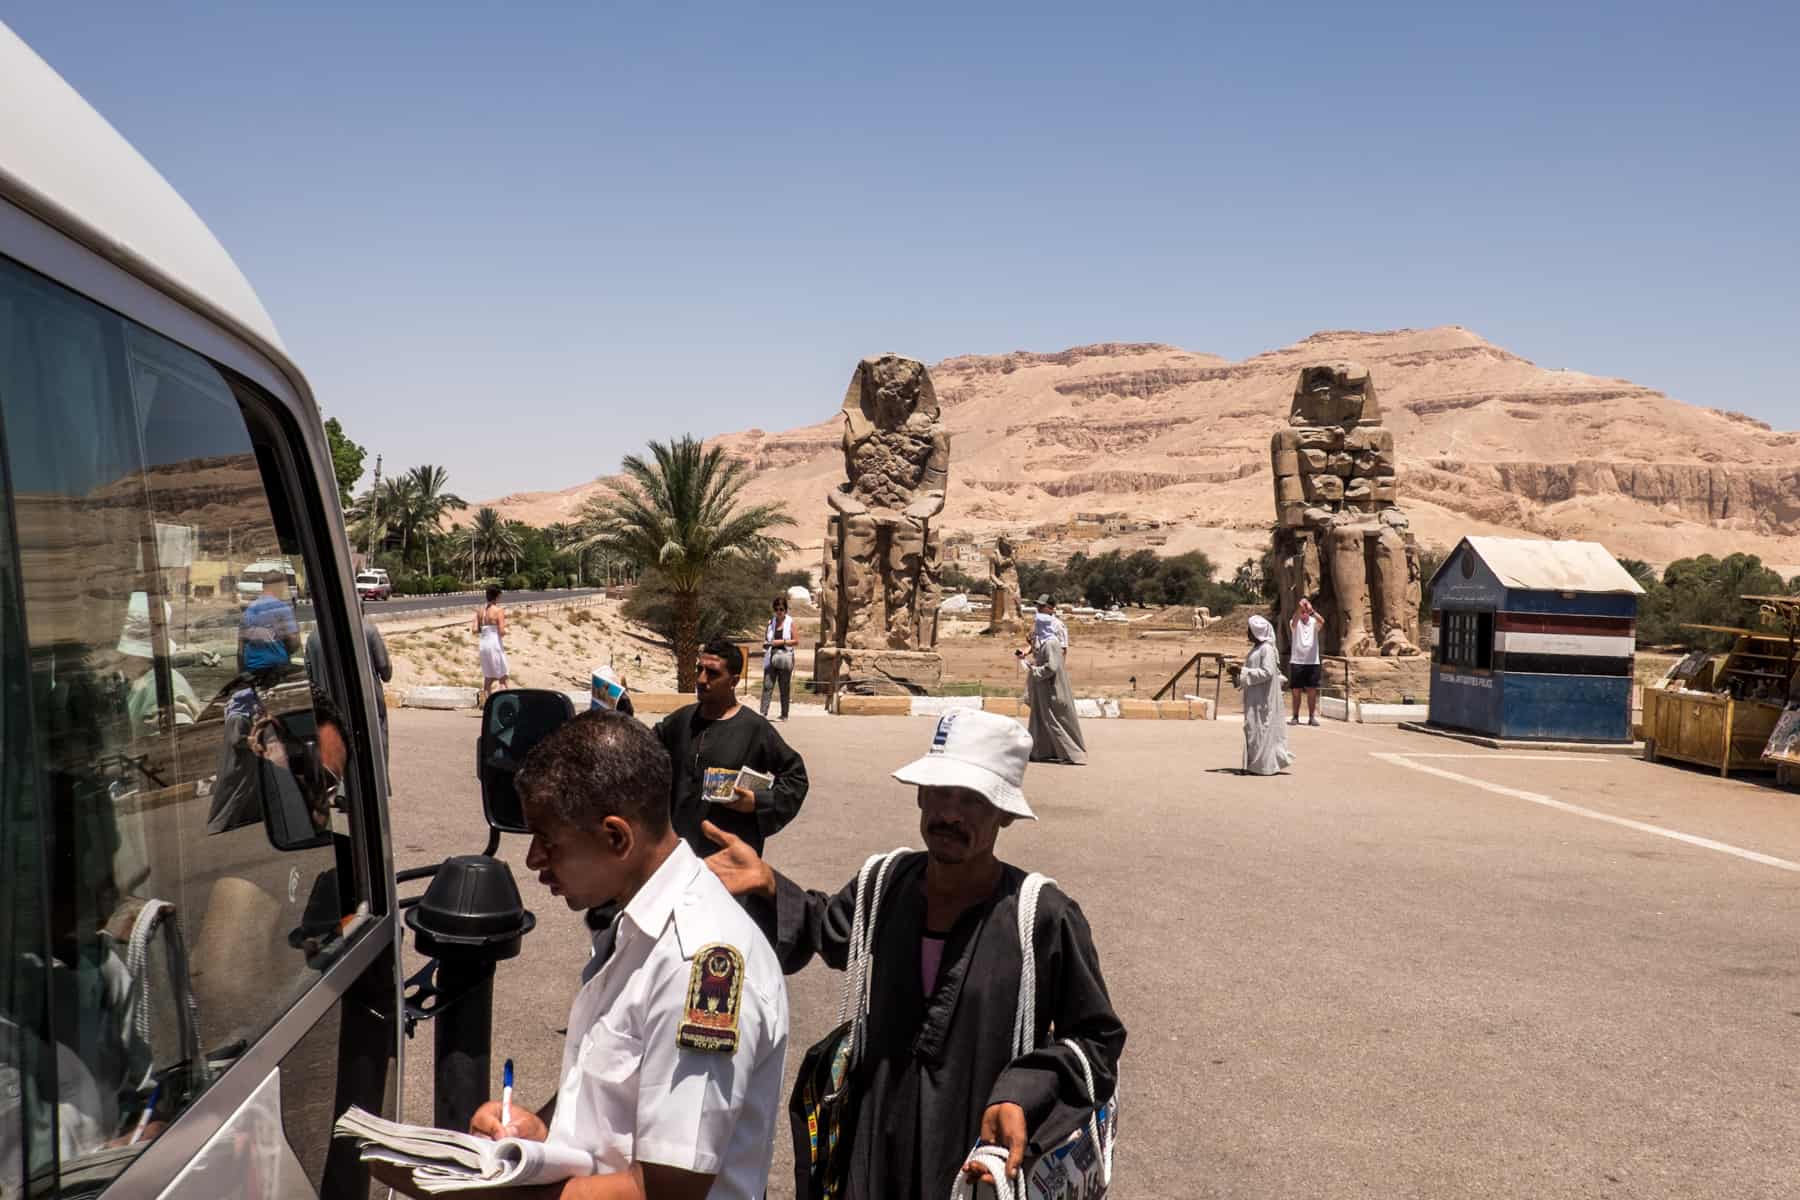 The Egyptian Tourism and Antiquities Police checking a white tourism van at an ancient statue site, with vendors behind selling handicrafts.